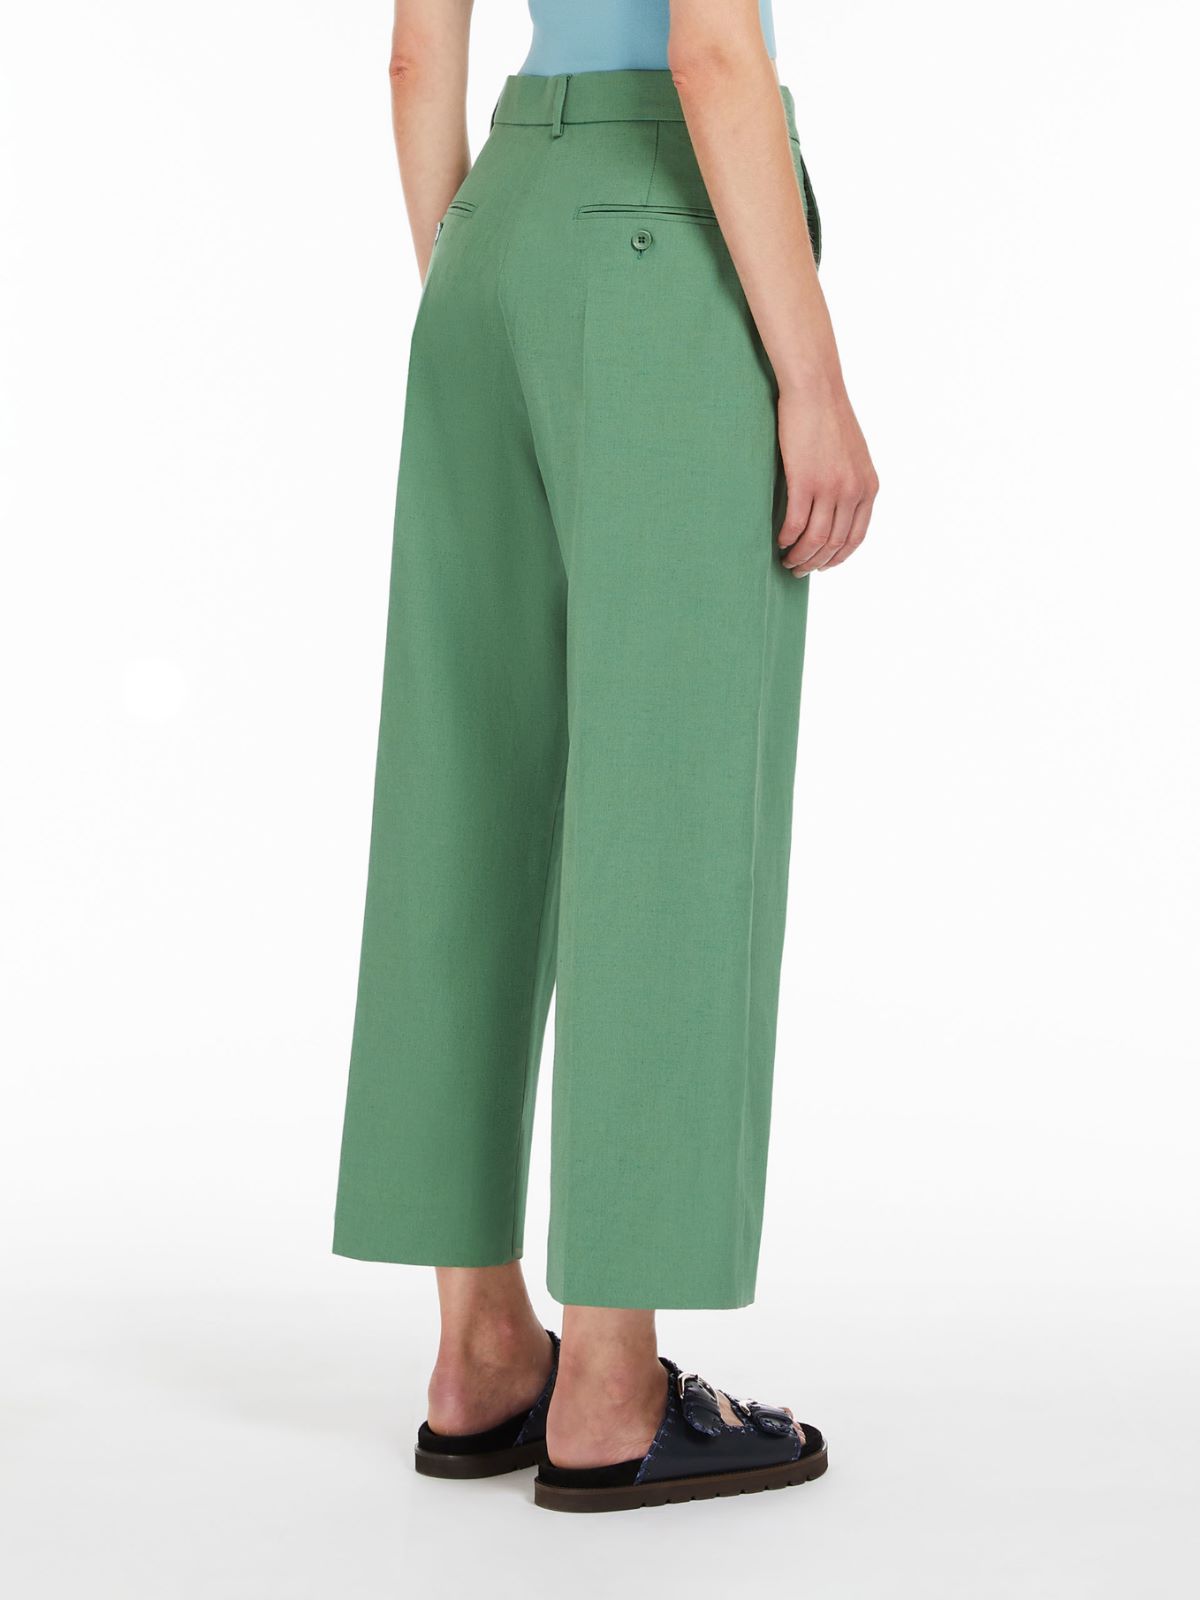 Max Mara Weekend Zircone Green COTTON AND LINEN CANVAS TROUSERS